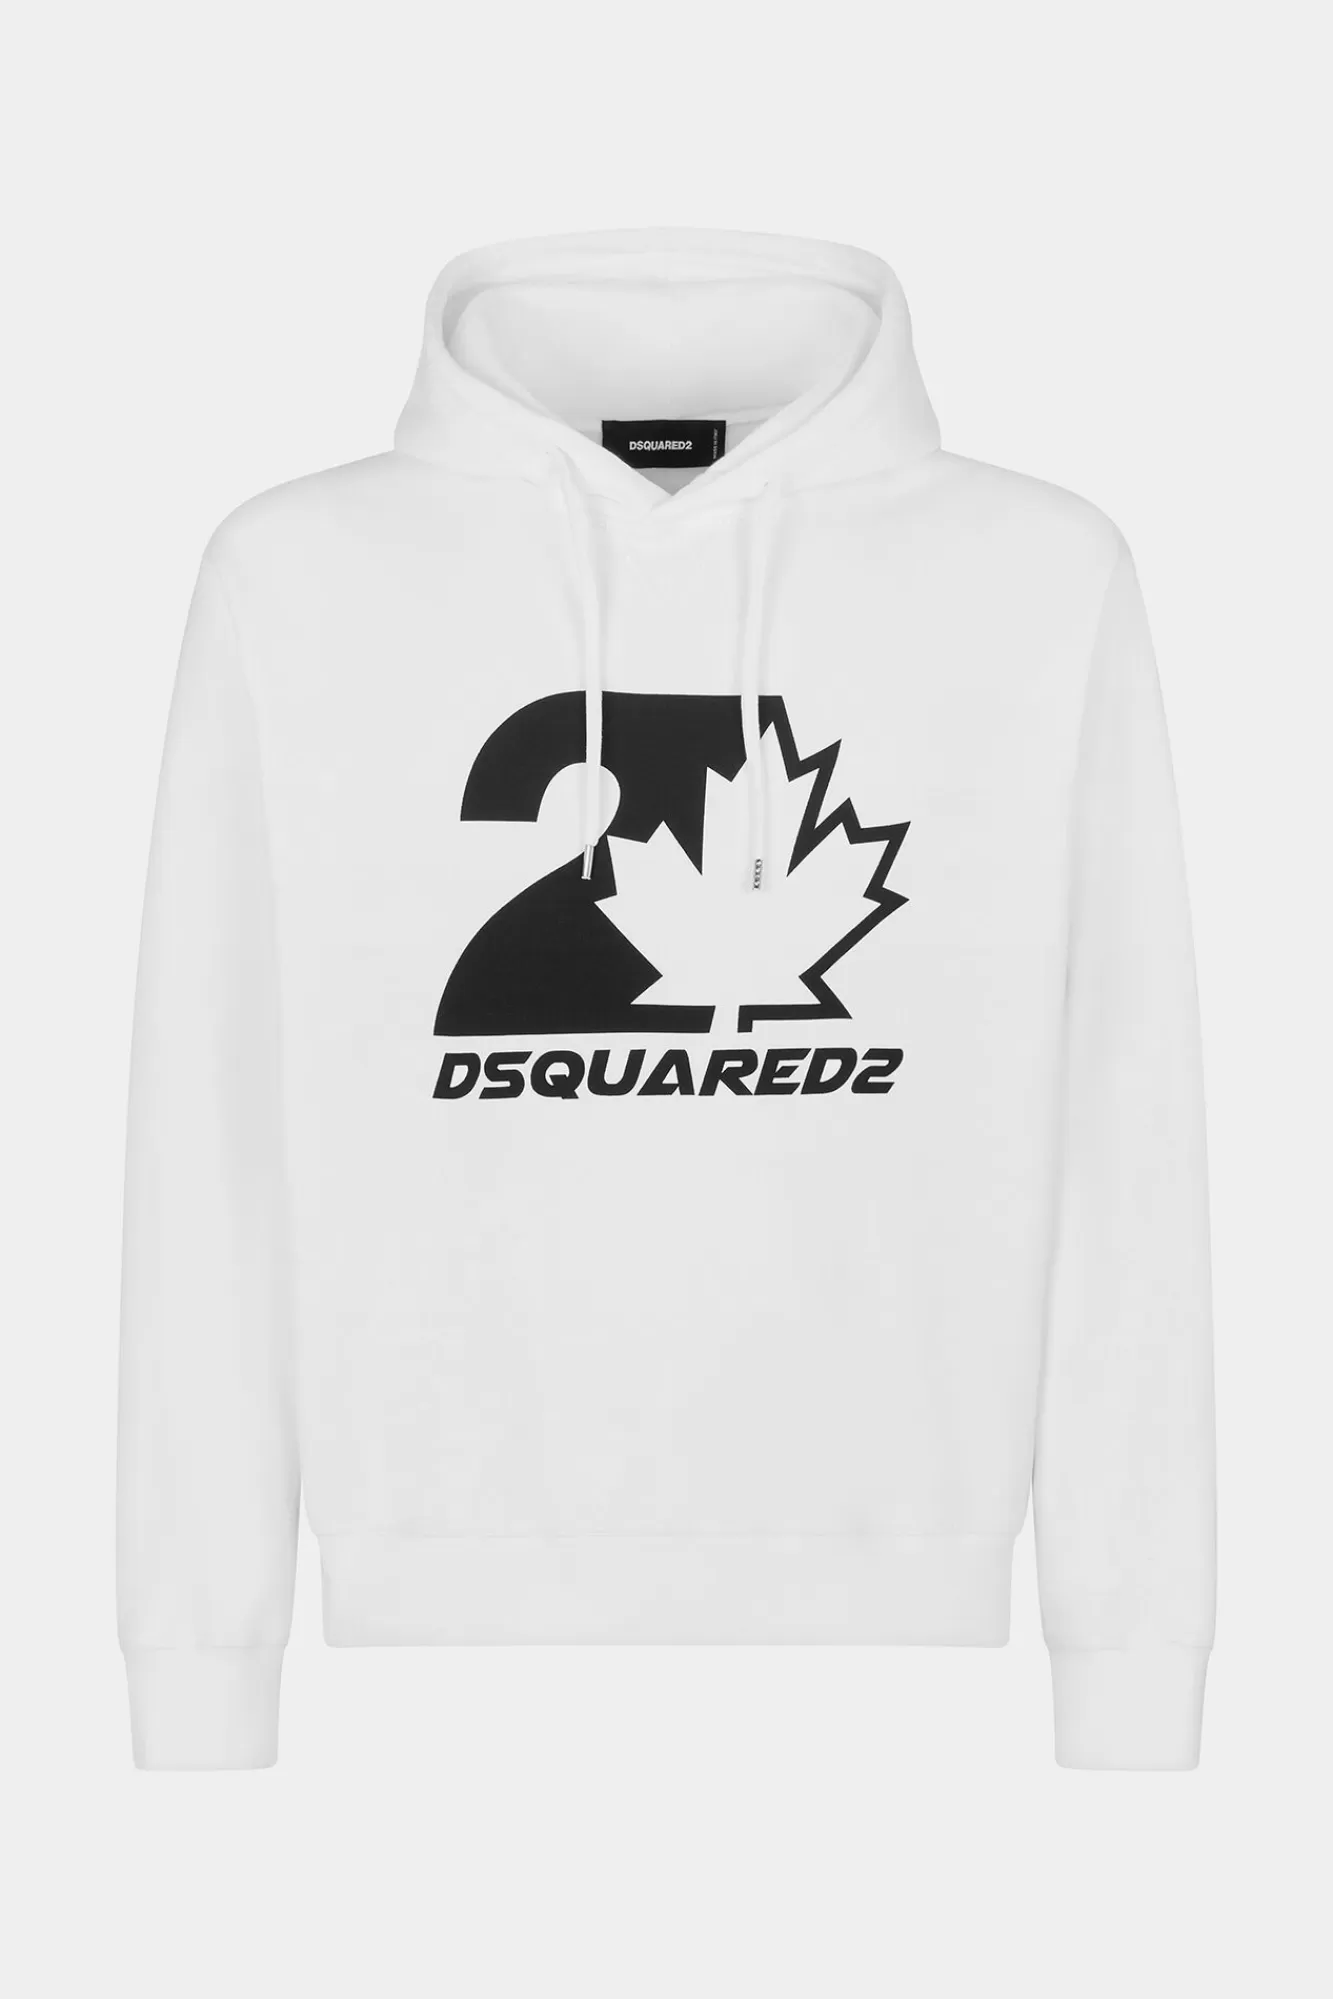 Cool Fit Hoodie<Dsquared2 Fashion